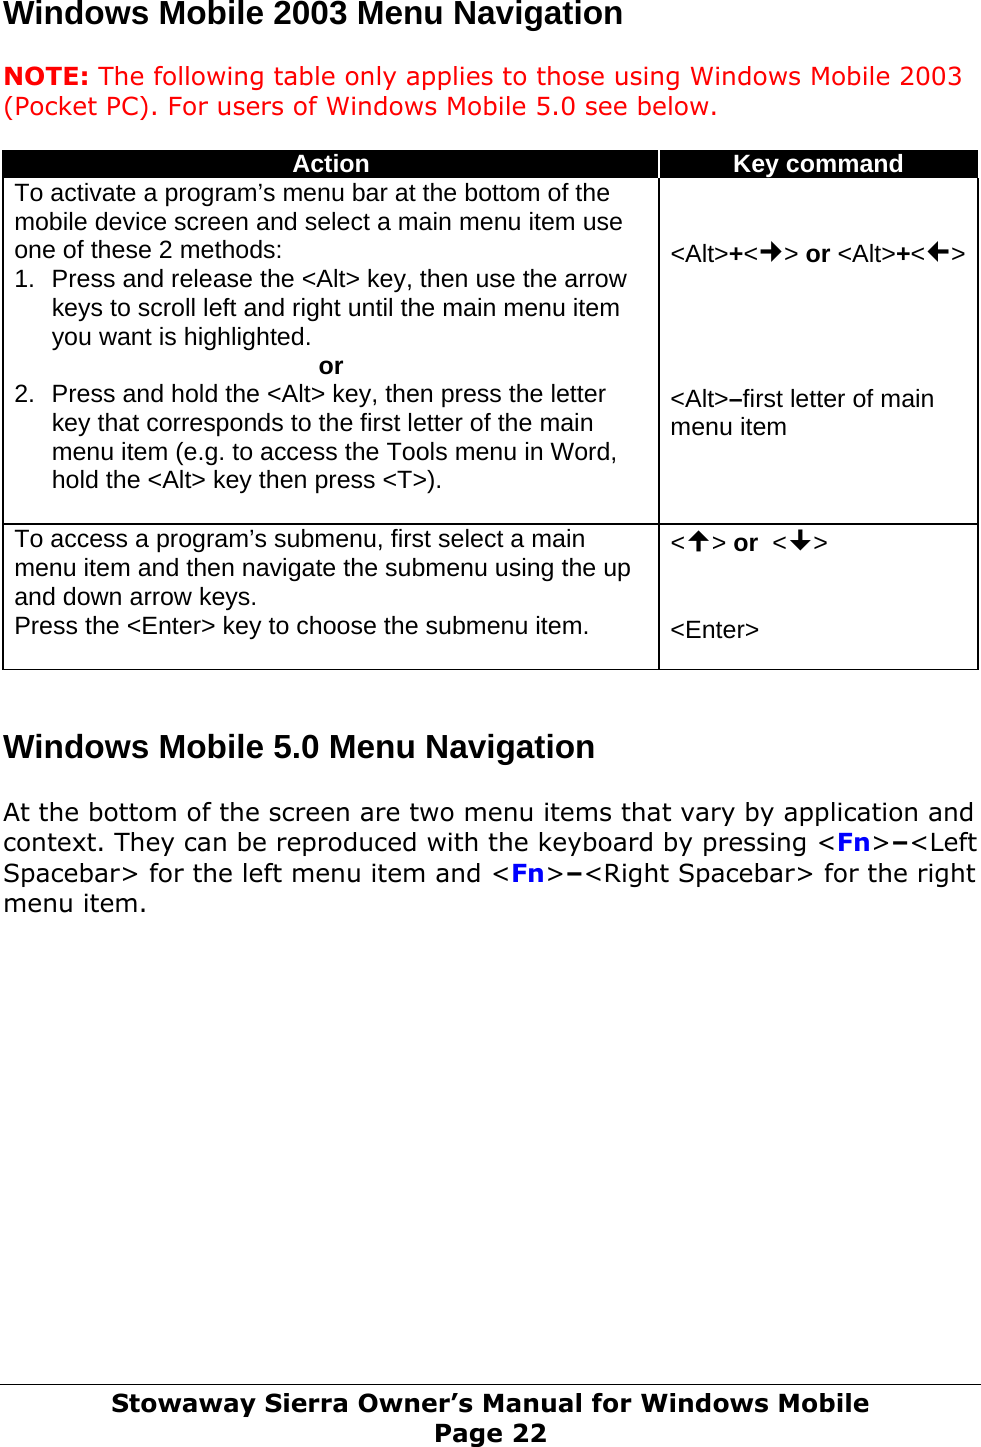 Windows Mobile 2003 Menu Navigation  NOTE: The following table only applies to those using Windows Mobile 2003 (Pocket PC). For users of Windows Mobile 5.0 see below.  Action  Key command To activate a program’s menu bar at the bottom of the mobile device screen and select a main menu item use one of these 2 methods: 1.  Press and release the &lt;Alt&gt; key, then use the arrow keys to scroll left and right until the main menu item you want is highlighted. or 2.  Press and hold the &lt;Alt&gt; key, then press the letter key that corresponds to the first letter of the main menu item (e.g. to access the Tools menu in Word, hold the &lt;Alt&gt; key then press &lt;T&gt;).    &lt;Alt&gt;+&lt;&gt; or &lt;Alt&gt;+&lt;&gt;    &lt;Alt&gt;–first letter of main menu item To access a program’s submenu, first select a main menu item and then navigate the submenu using the up and down arrow keys. Press the &lt;Enter&gt; key to choose the submenu item.  &lt;&gt; or  &lt;&gt;   &lt;Enter&gt;   Windows Mobile 5.0 Menu Navigation  At the bottom of the screen are two menu items that vary by application and context. They can be reproduced with the keyboard by pressing &lt;Fn&gt;–&lt;Left Spacebar&gt; for the left menu item and &lt;Fn&gt;–&lt;Right Spacebar&gt; for the right menu item.               Stowaway Sierra Owner’s Manual for Windows Mobile Page 22 